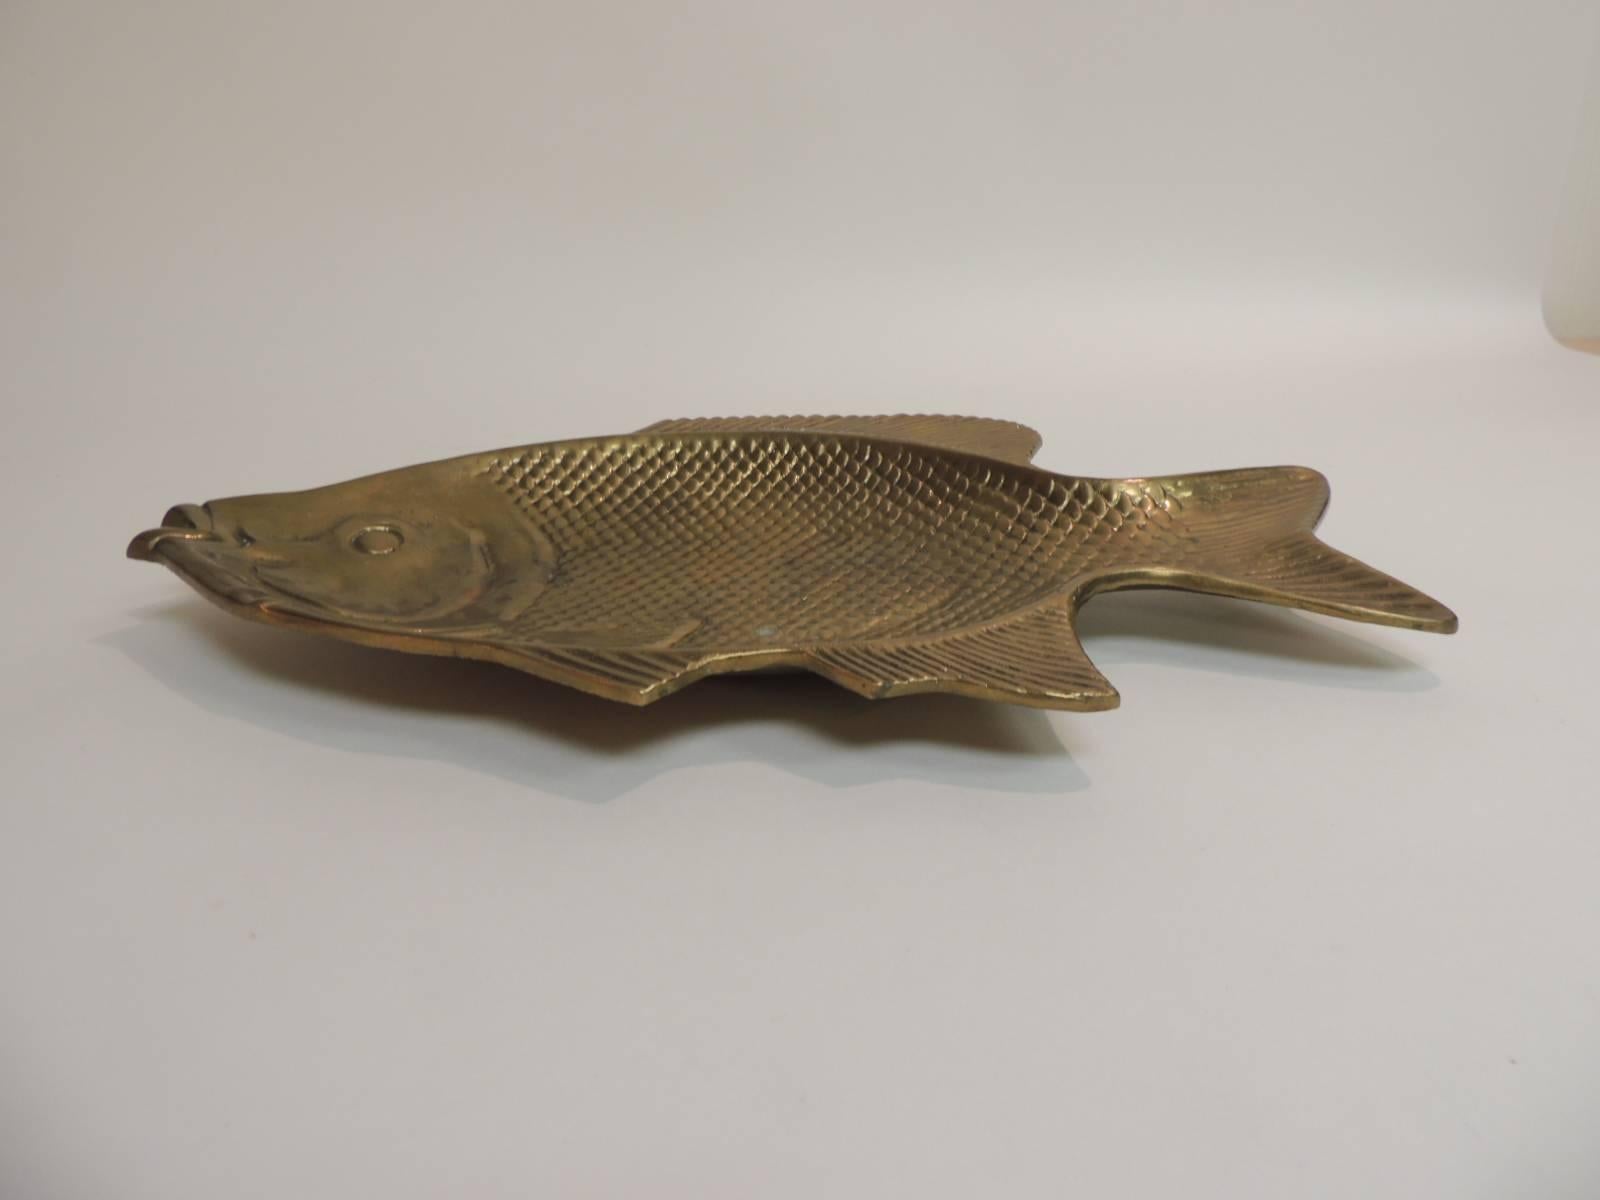 Vintage large brass serving fish platter.
Vintage large brass serving fish platter. 
here is a hook in the back: you can hang it or use it as a catch-all tray.
Size: 16 x 10 x 1.5 D.

 